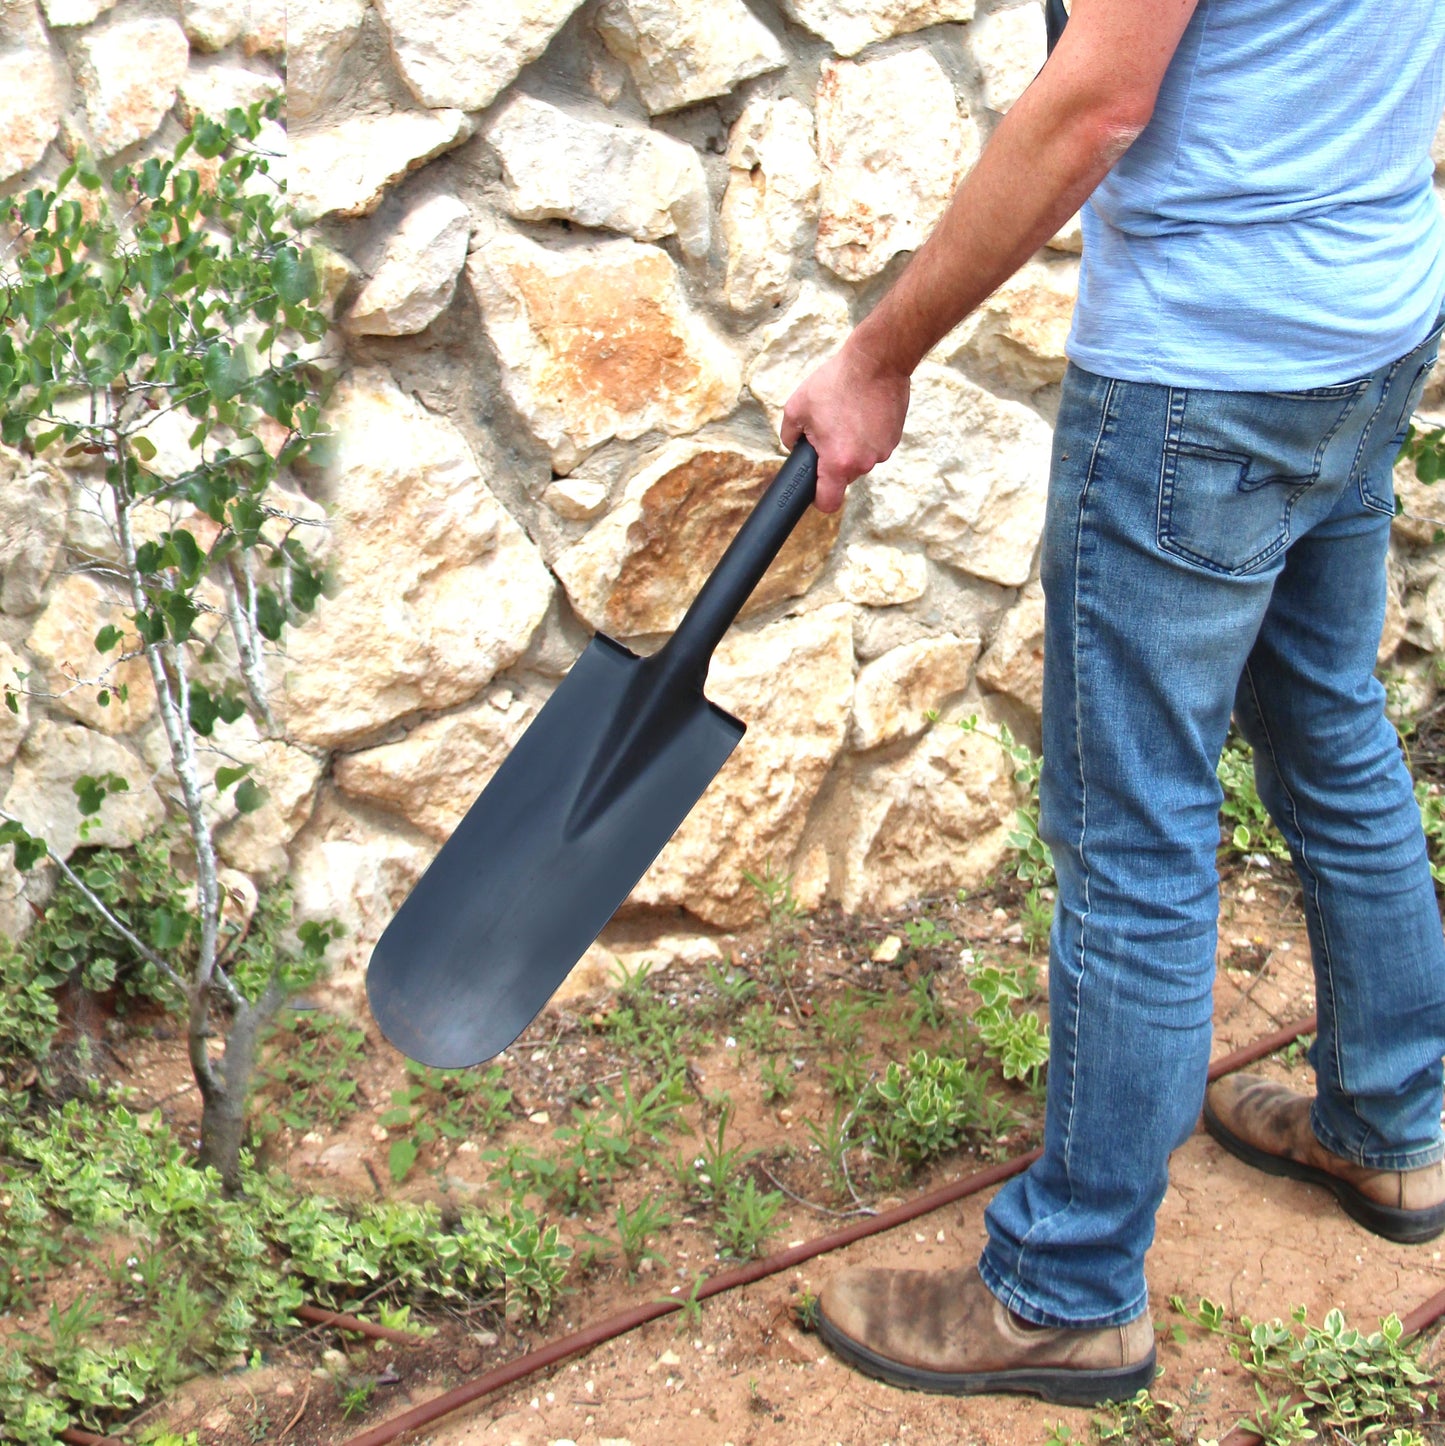 TABOR TOOLS J213 Trench Digging and Drain Shovel Narrow Blade and and D-Grip 31" Fiberglass Handle